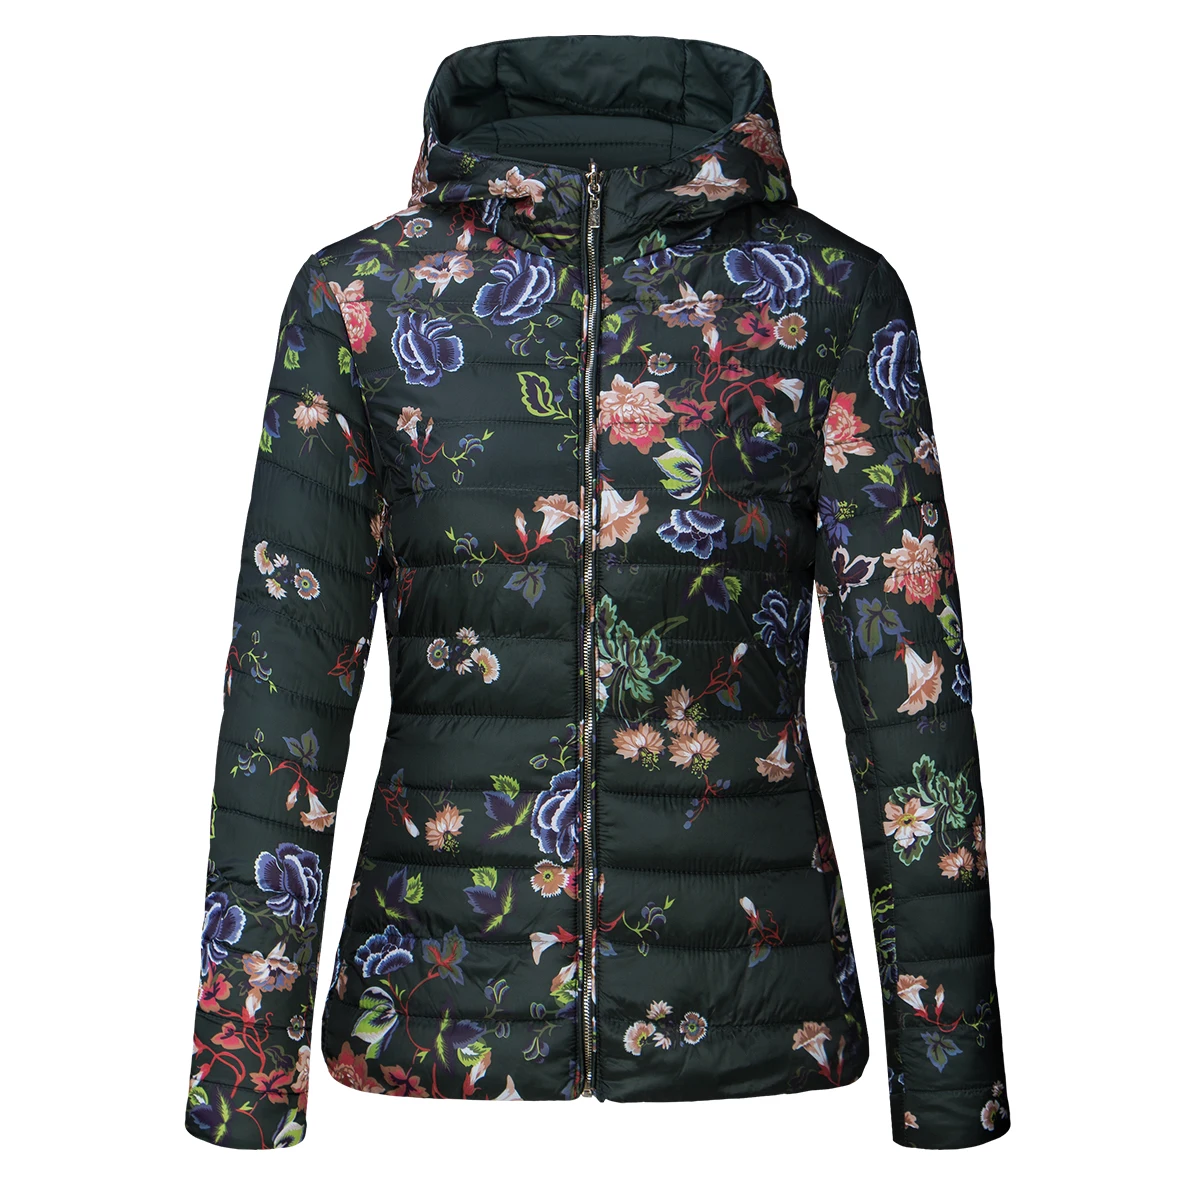 

Best Selling Fashionable Women Winter Long Sleeve Warm jacket Which is Reversible With Hooded, Picture